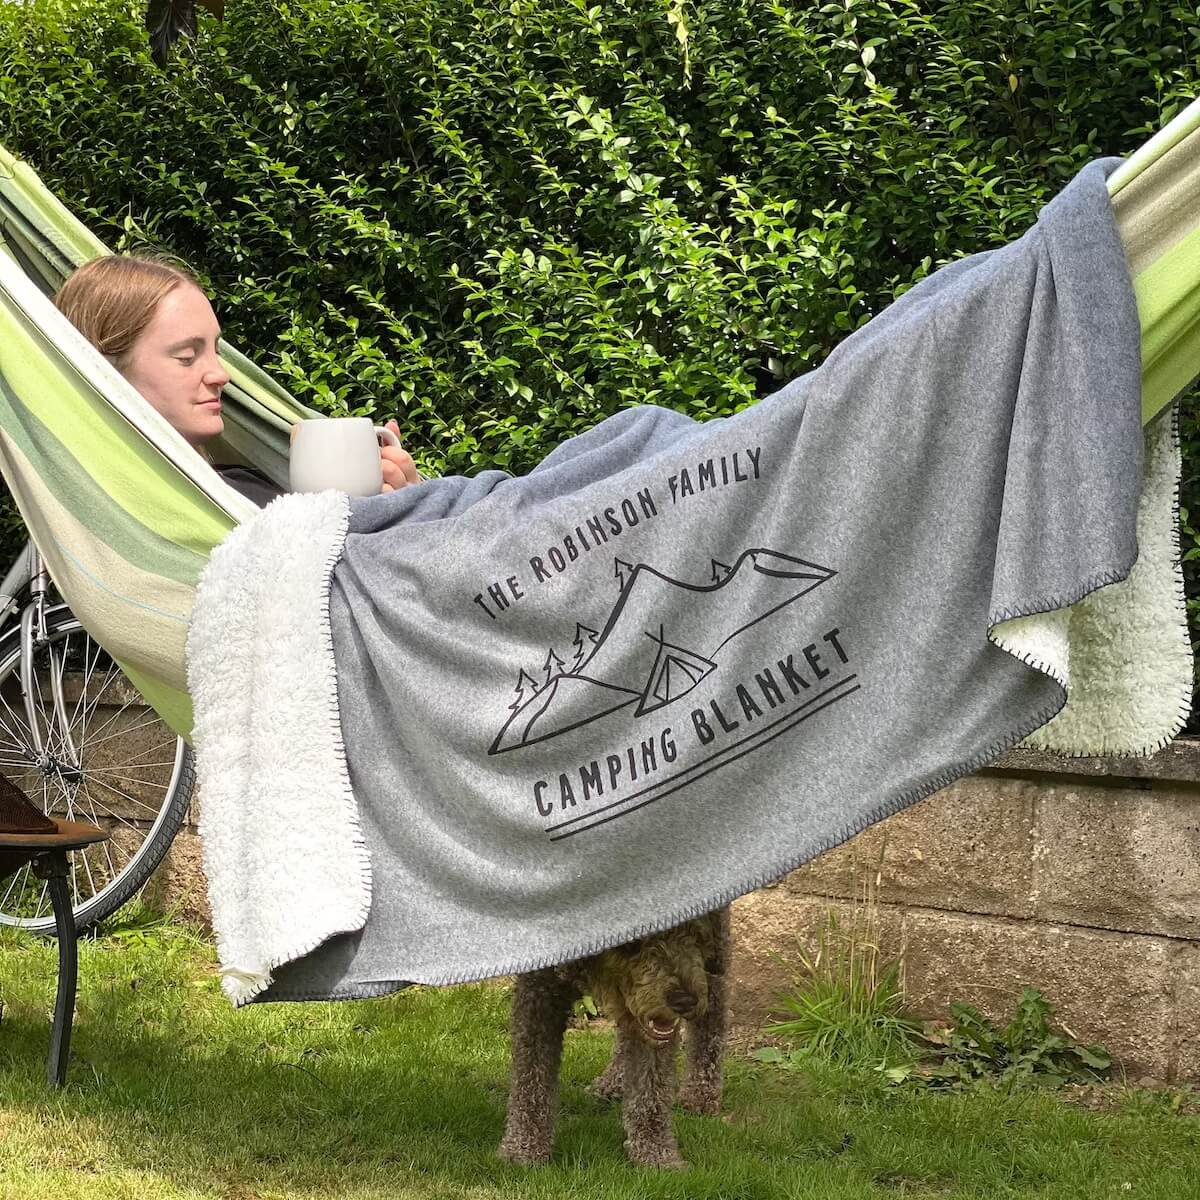 personalised camping blanket drapped over woman in hammock.